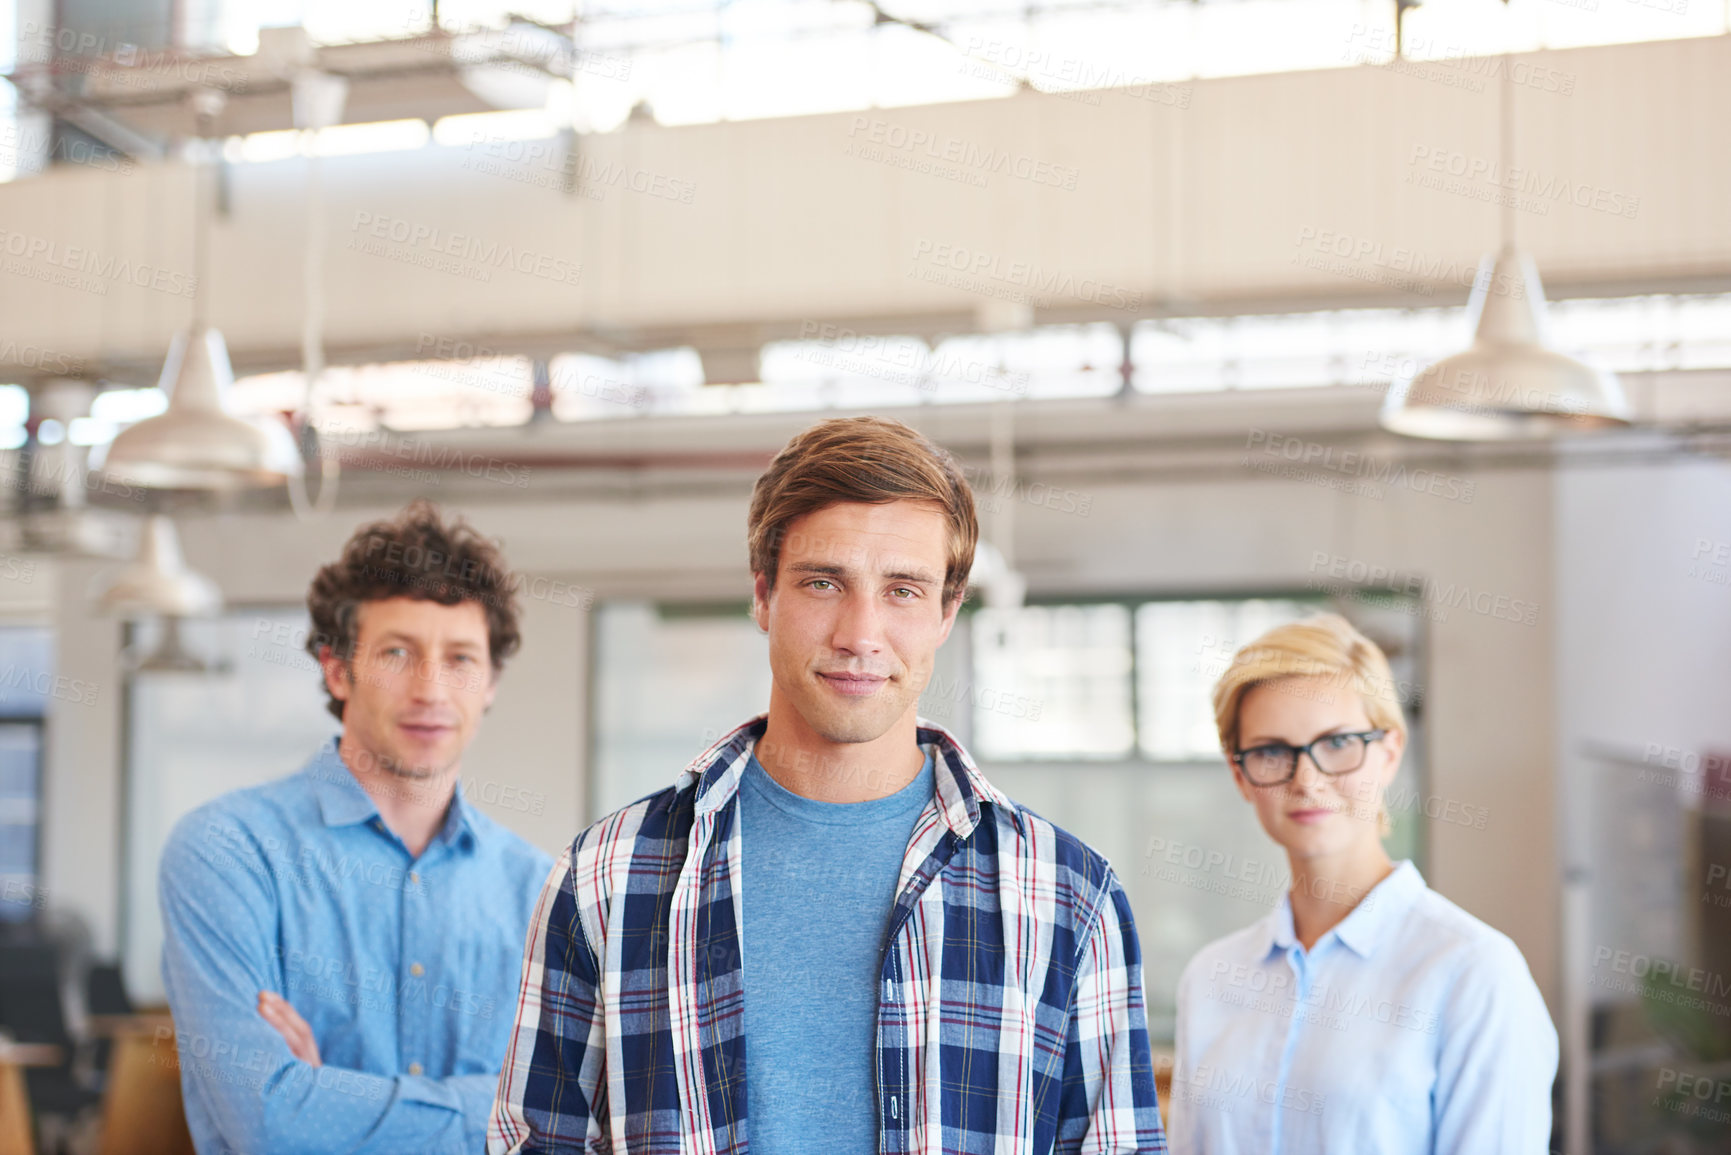 Buy stock photo Cropped portrait of three businesspeople standing in the office